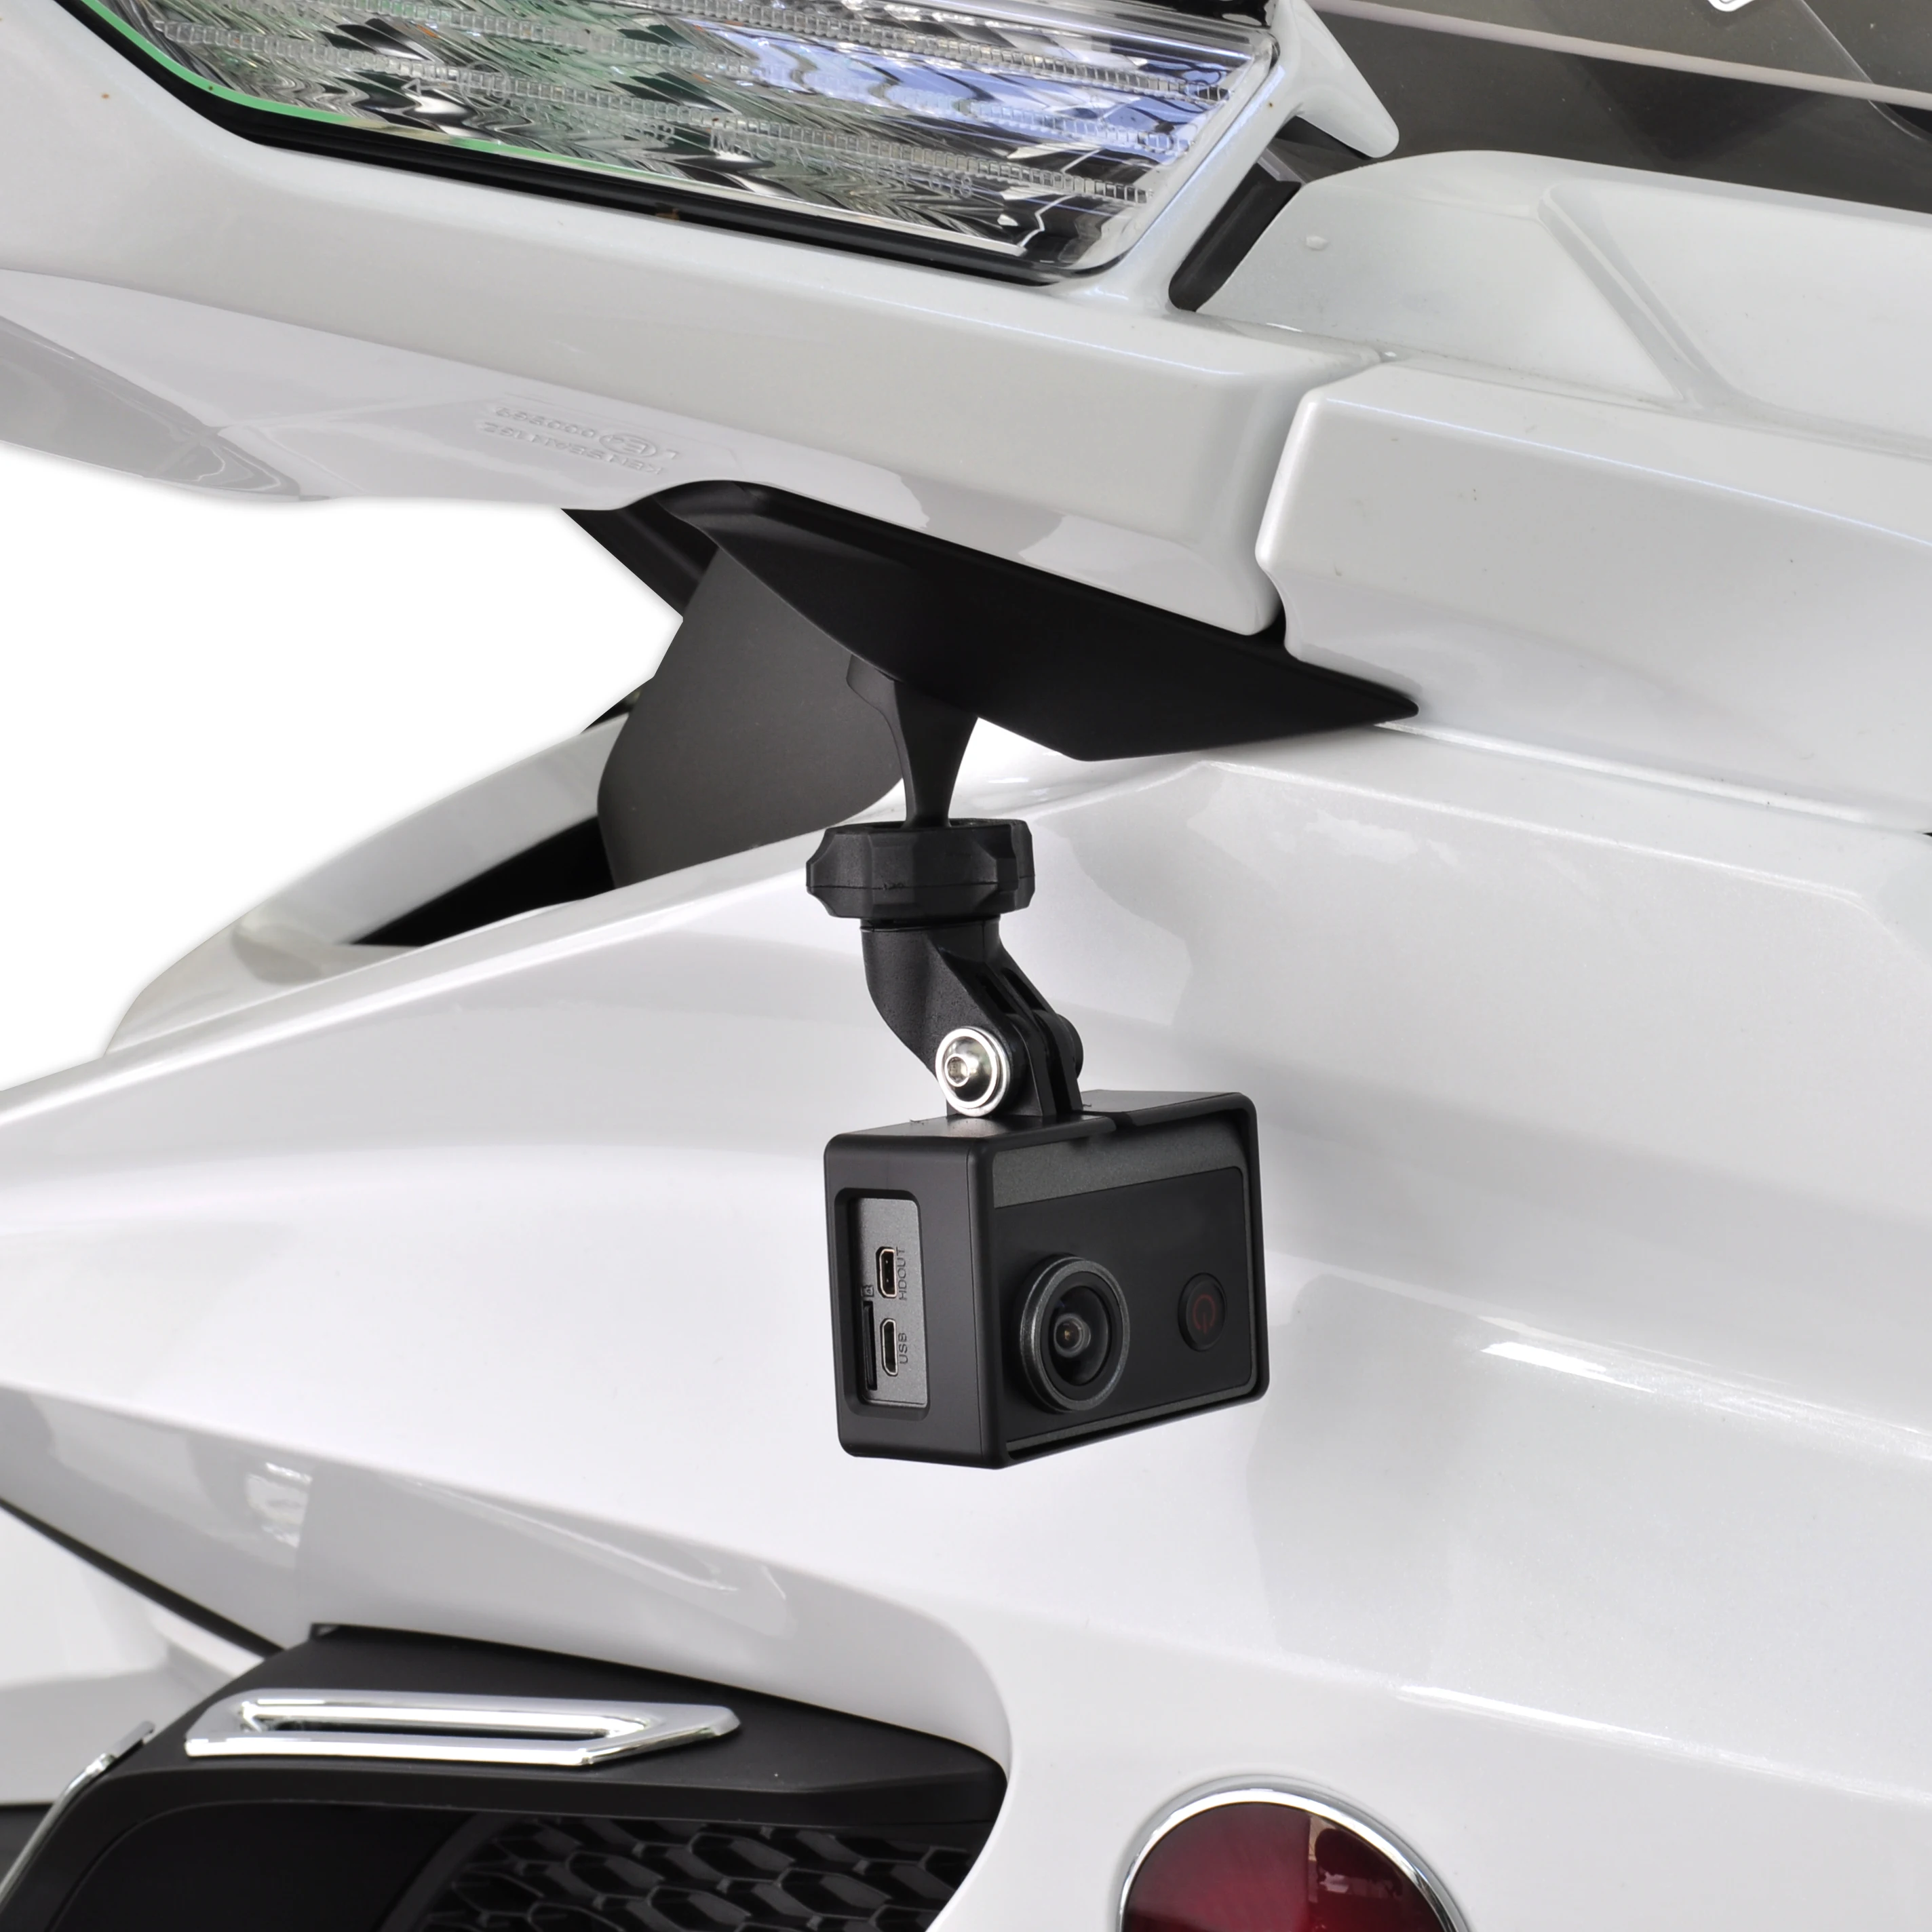 Aluminum Alloy Rear View Mirror Camera Frame Bracket Accessory Mounting Kit For Honda Gold Wing GL1800 F6B 2018-2023 Motorcycle rear view mirror action camera mount kit for honda gold wing gl1800 gl1800b f6b motorcycle 2018 2023 gopro accessories